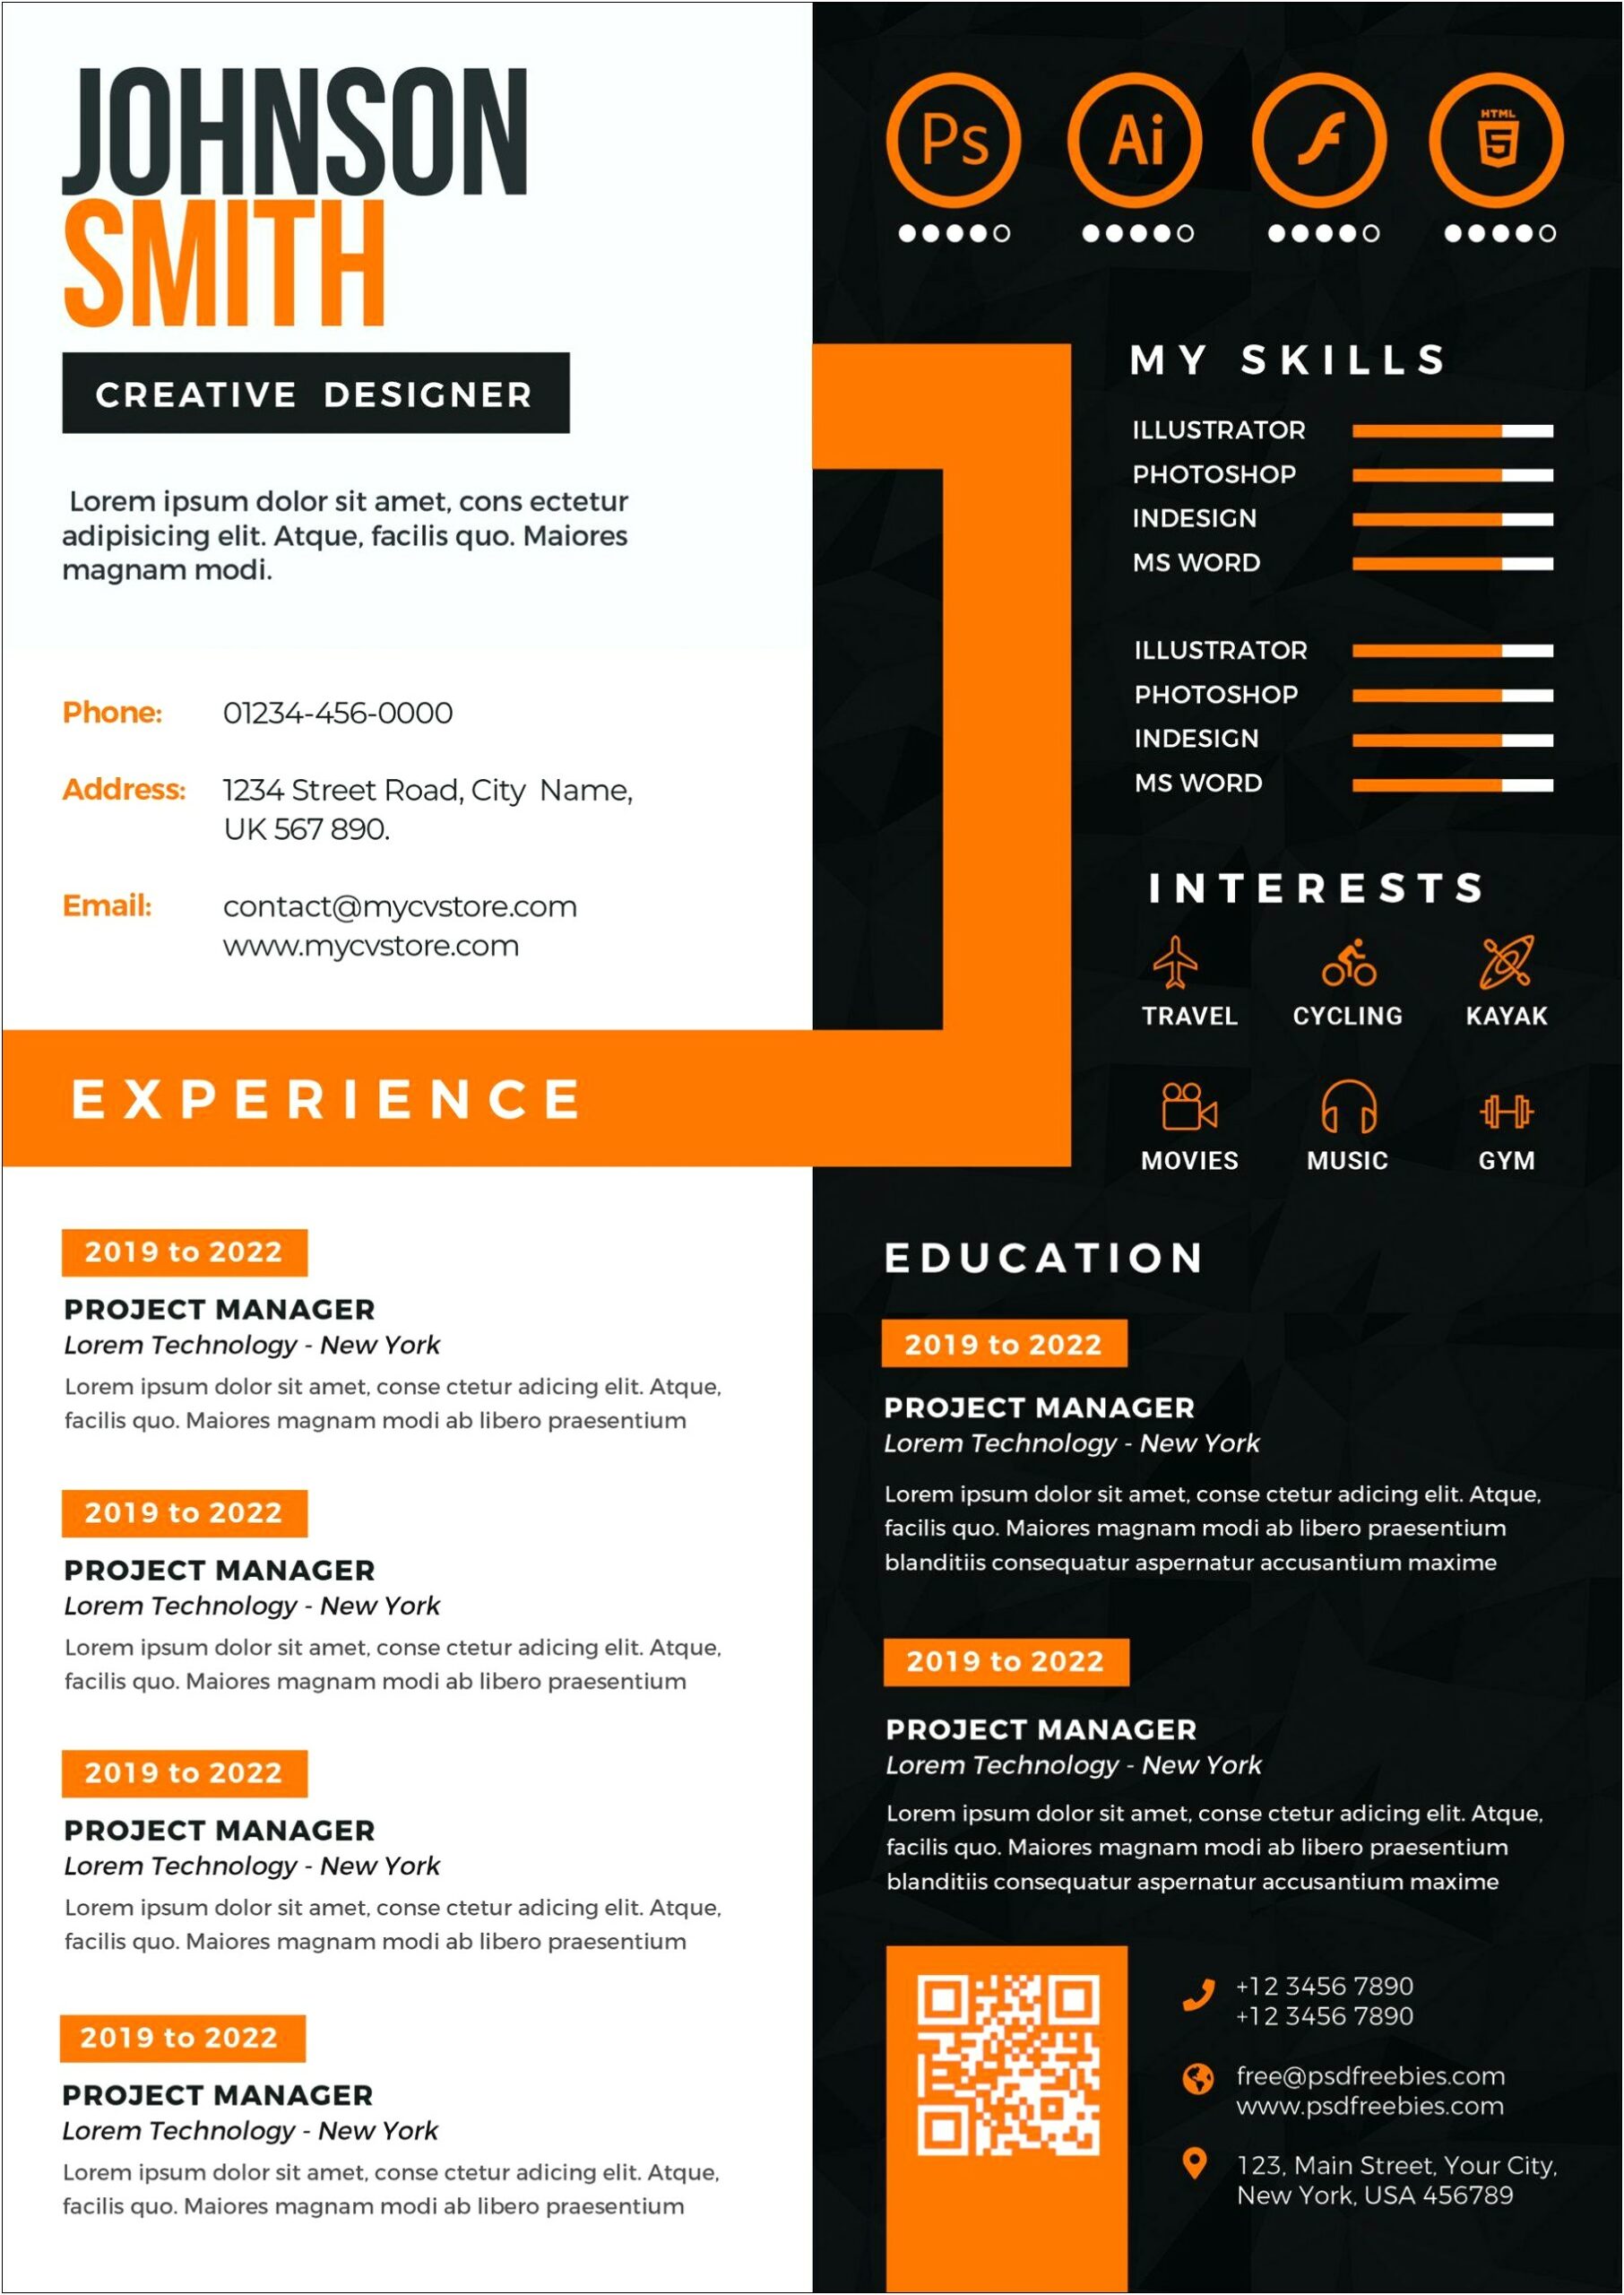 Assisstant Project Manager Sample Resume